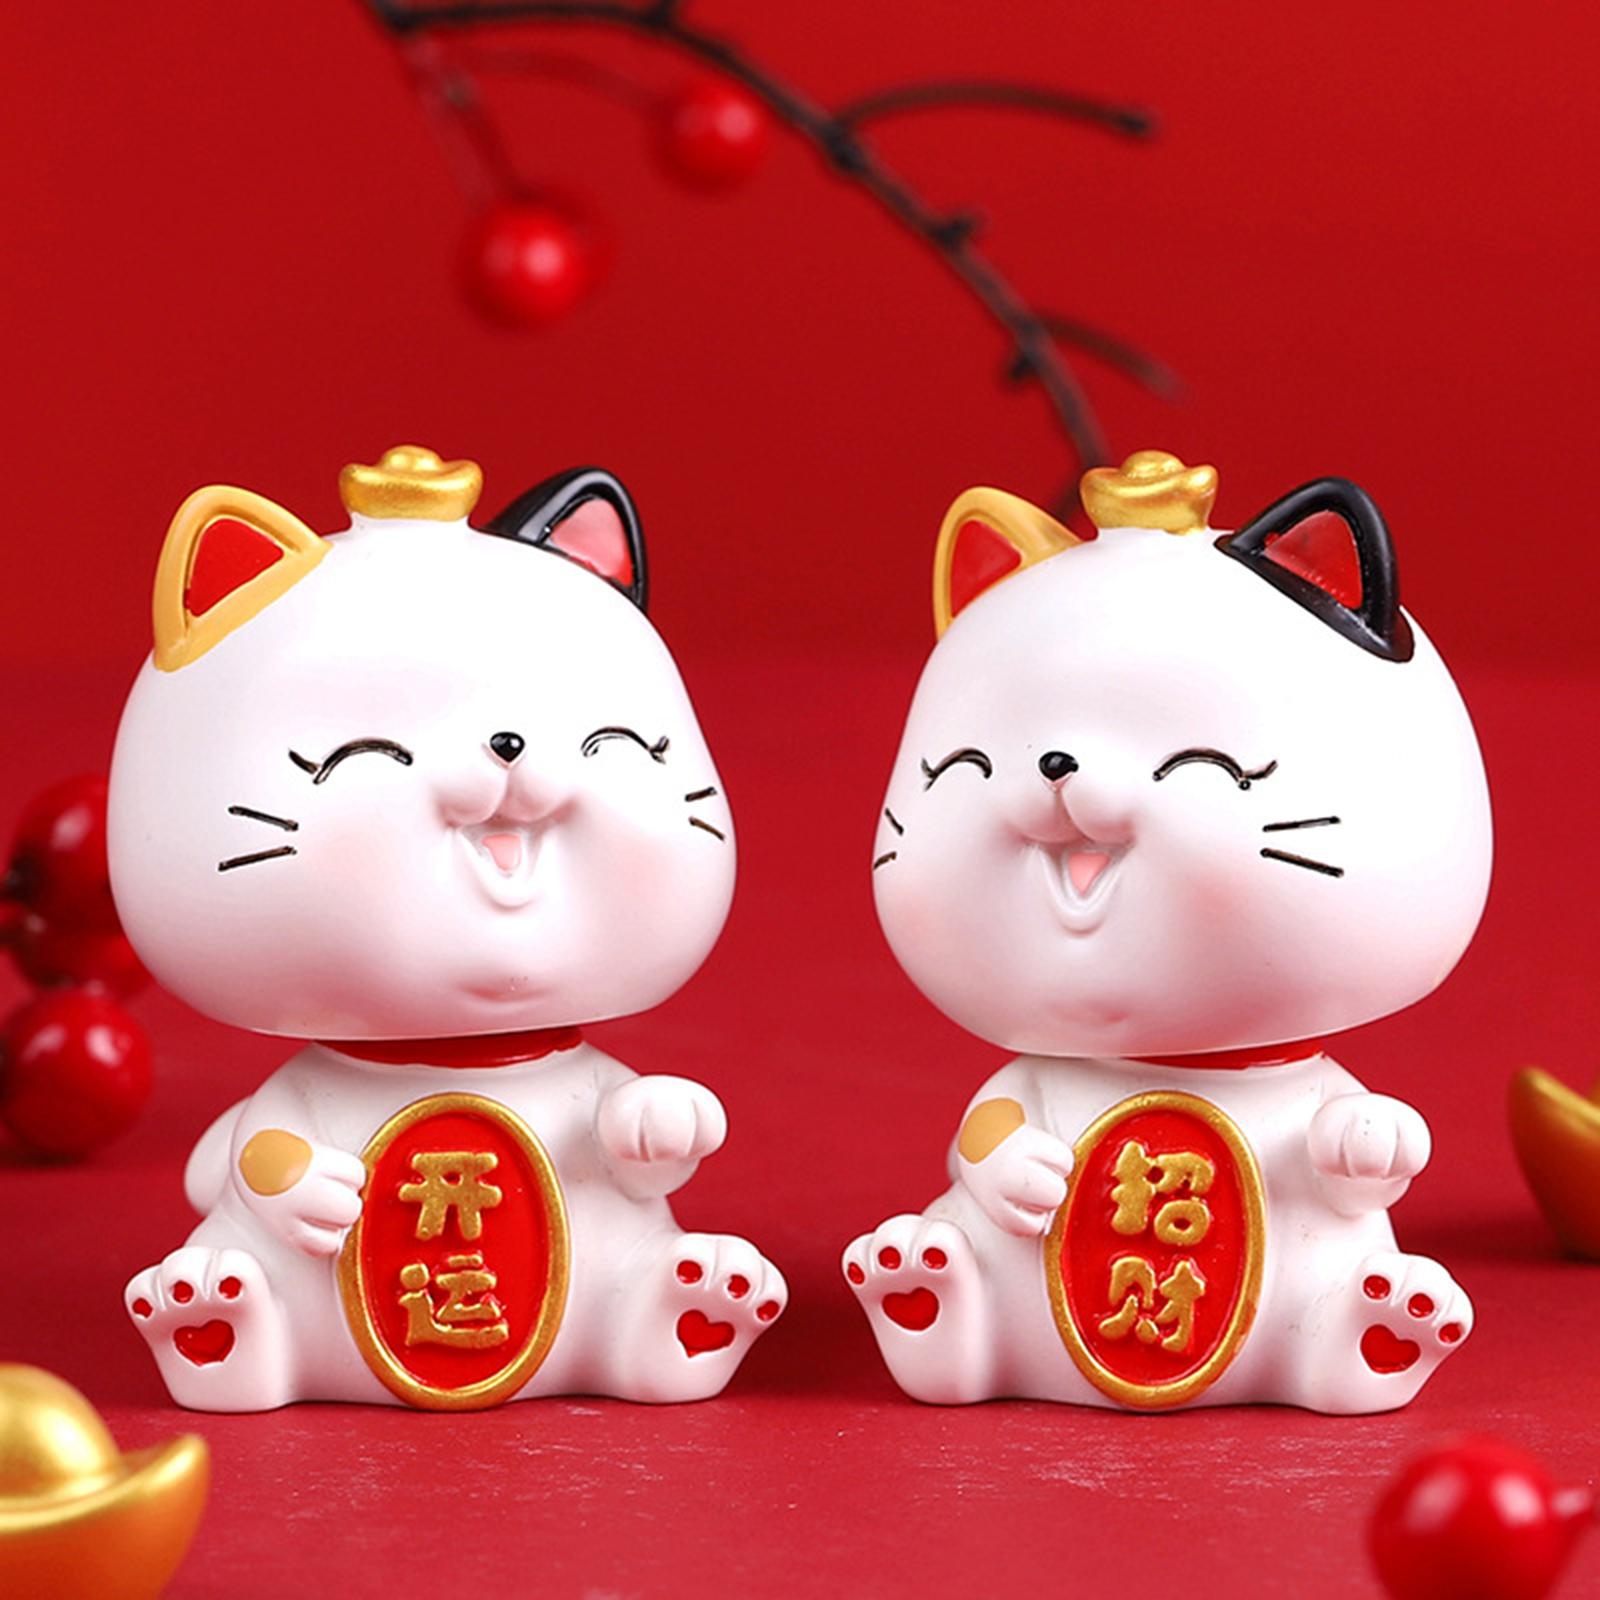 Lucky Cat Figurine Artwork Creative Ornament for Tabletop Present Restaurant Style A